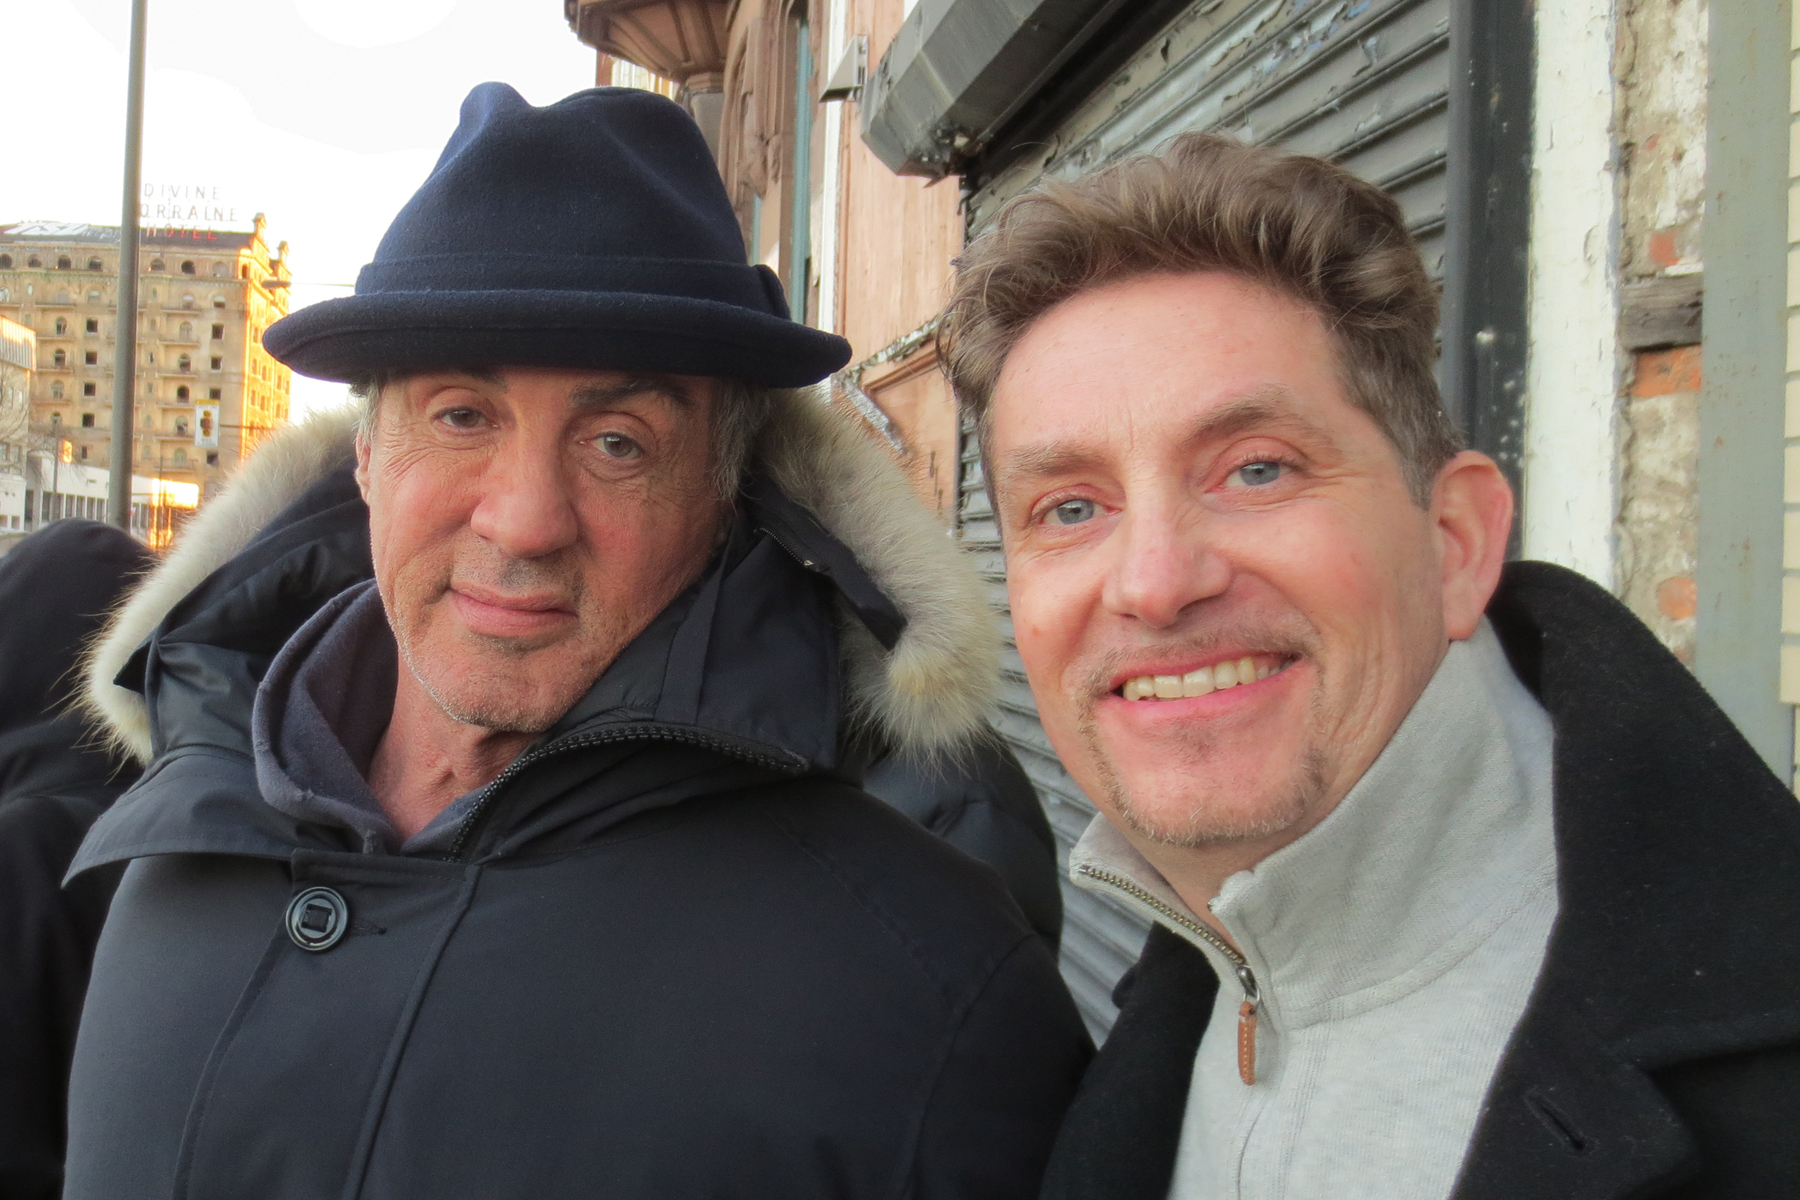 Sylvester Stallone and actor Michael Christaldi on the set of Creed the latest edition in the Rocky Balboa series.